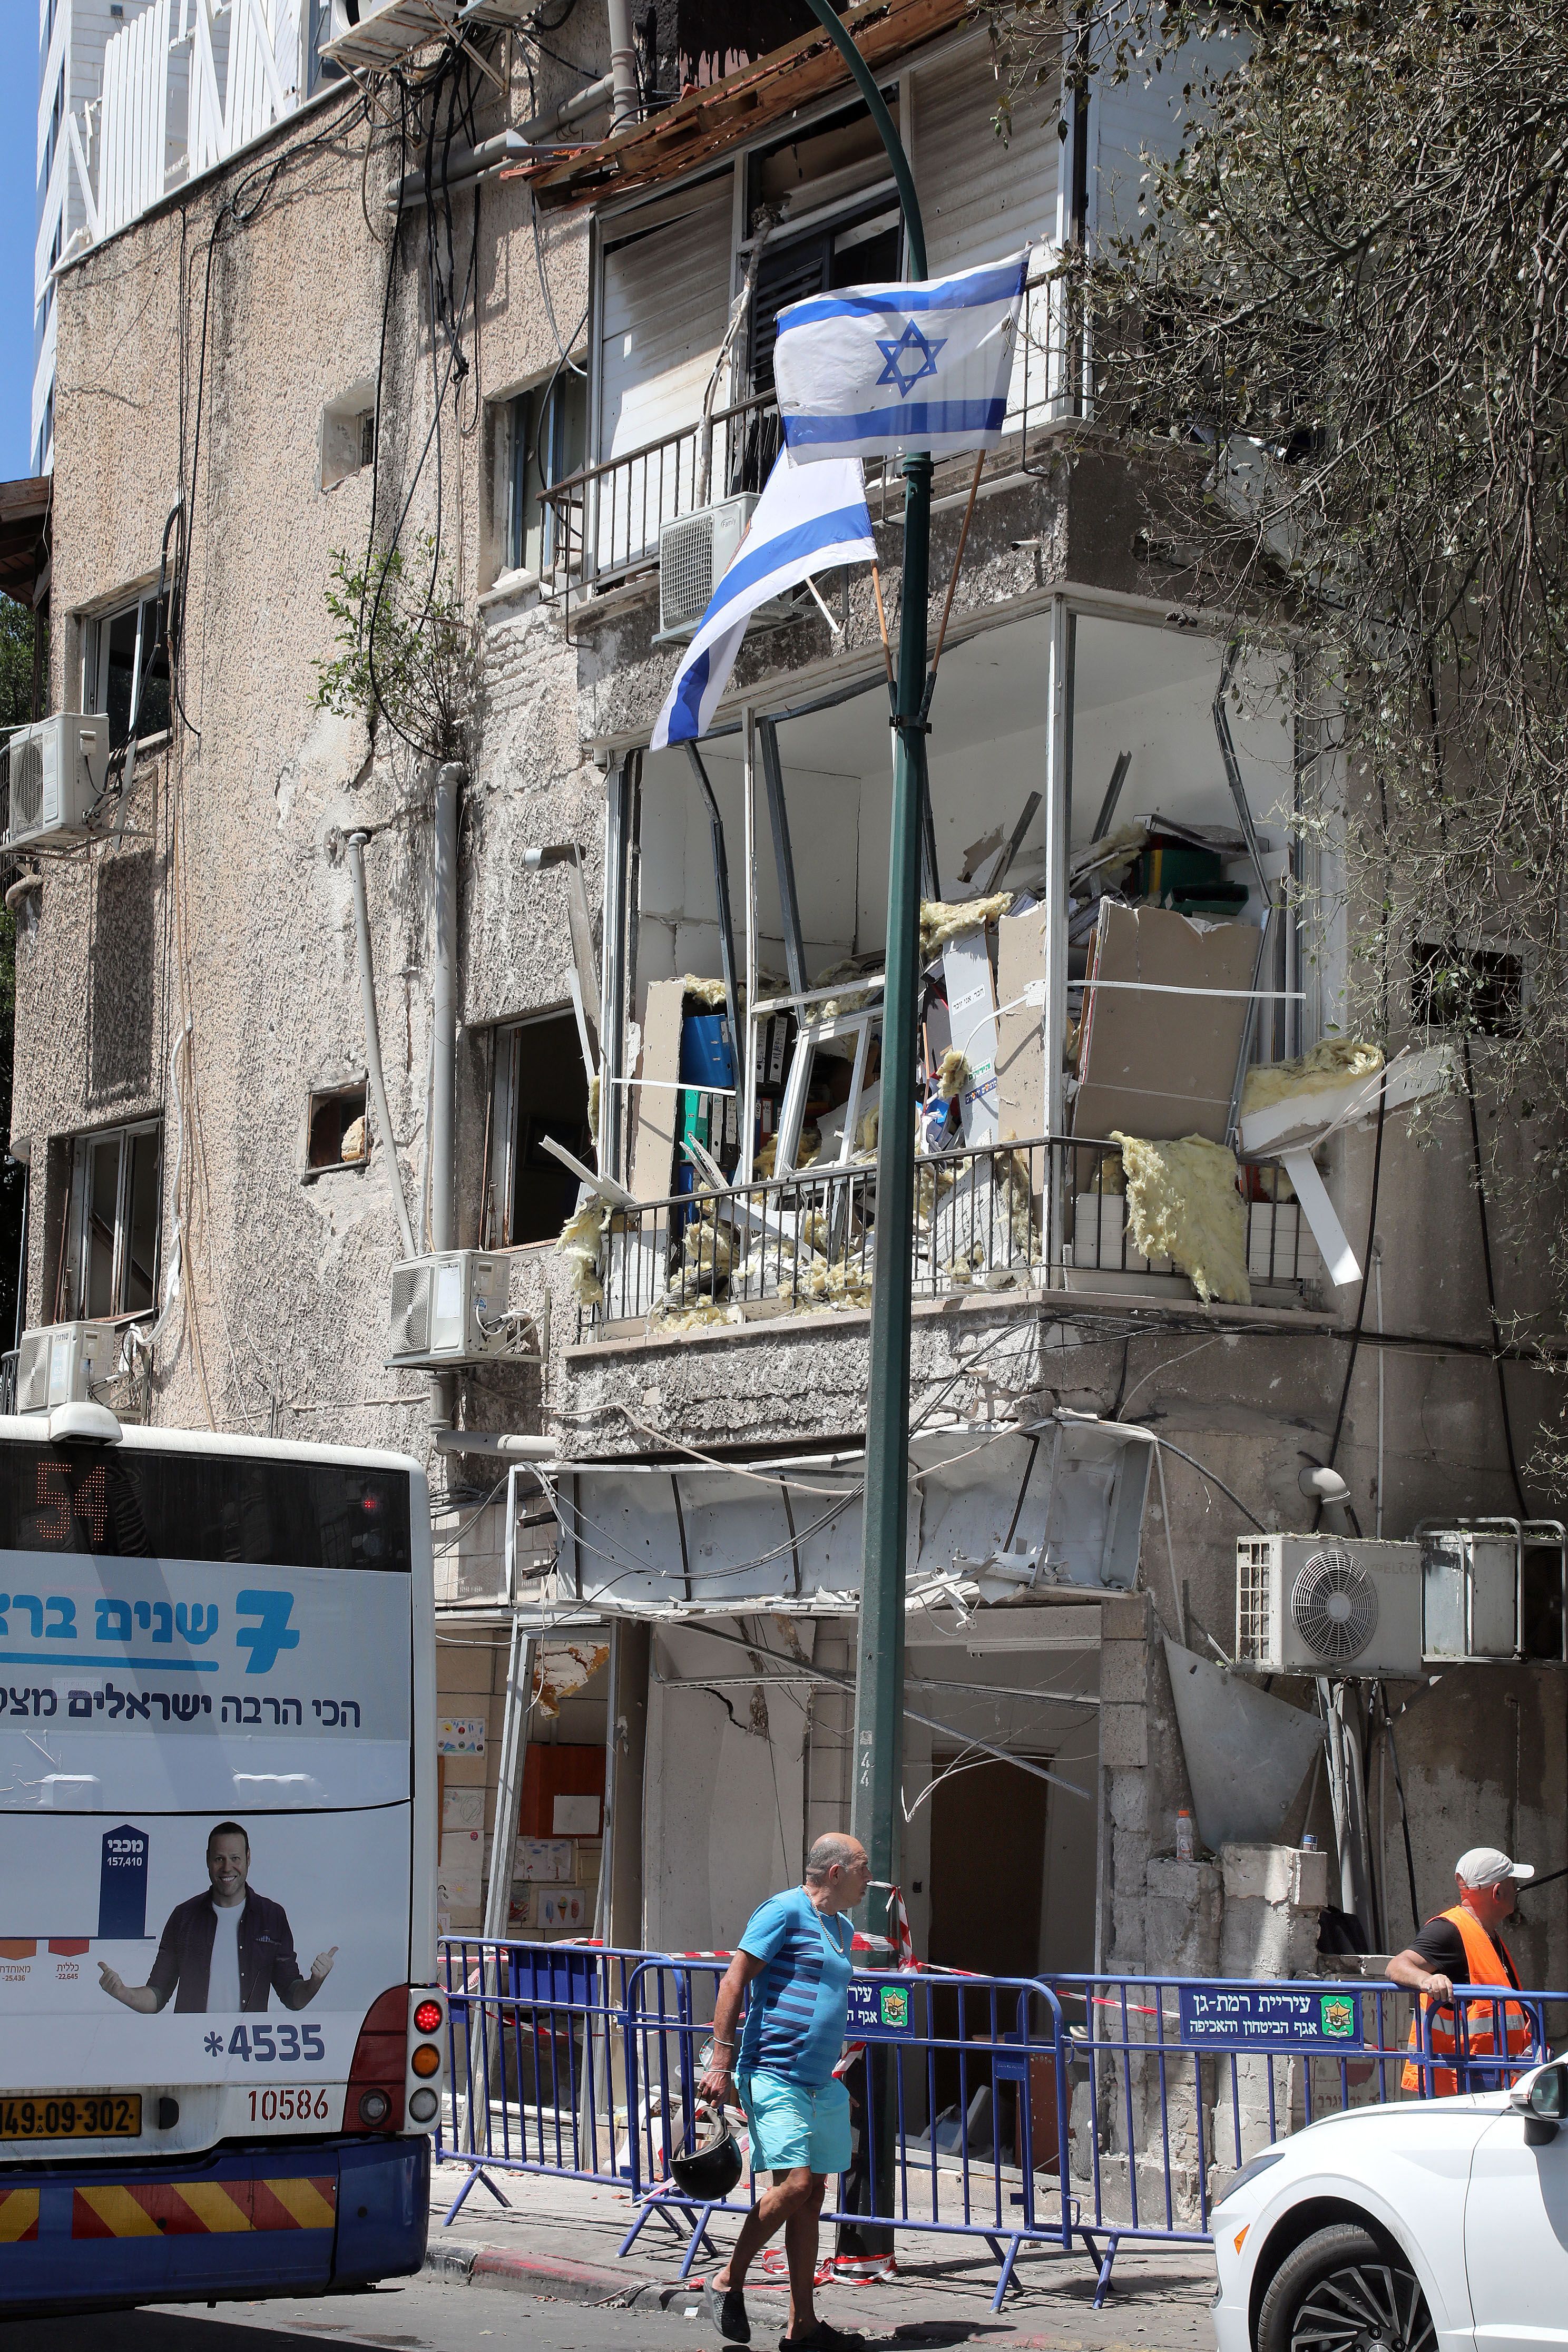 A picture shows damaged buildings in Ramat Gan near the coastal city of Tel Aviv, on May 16